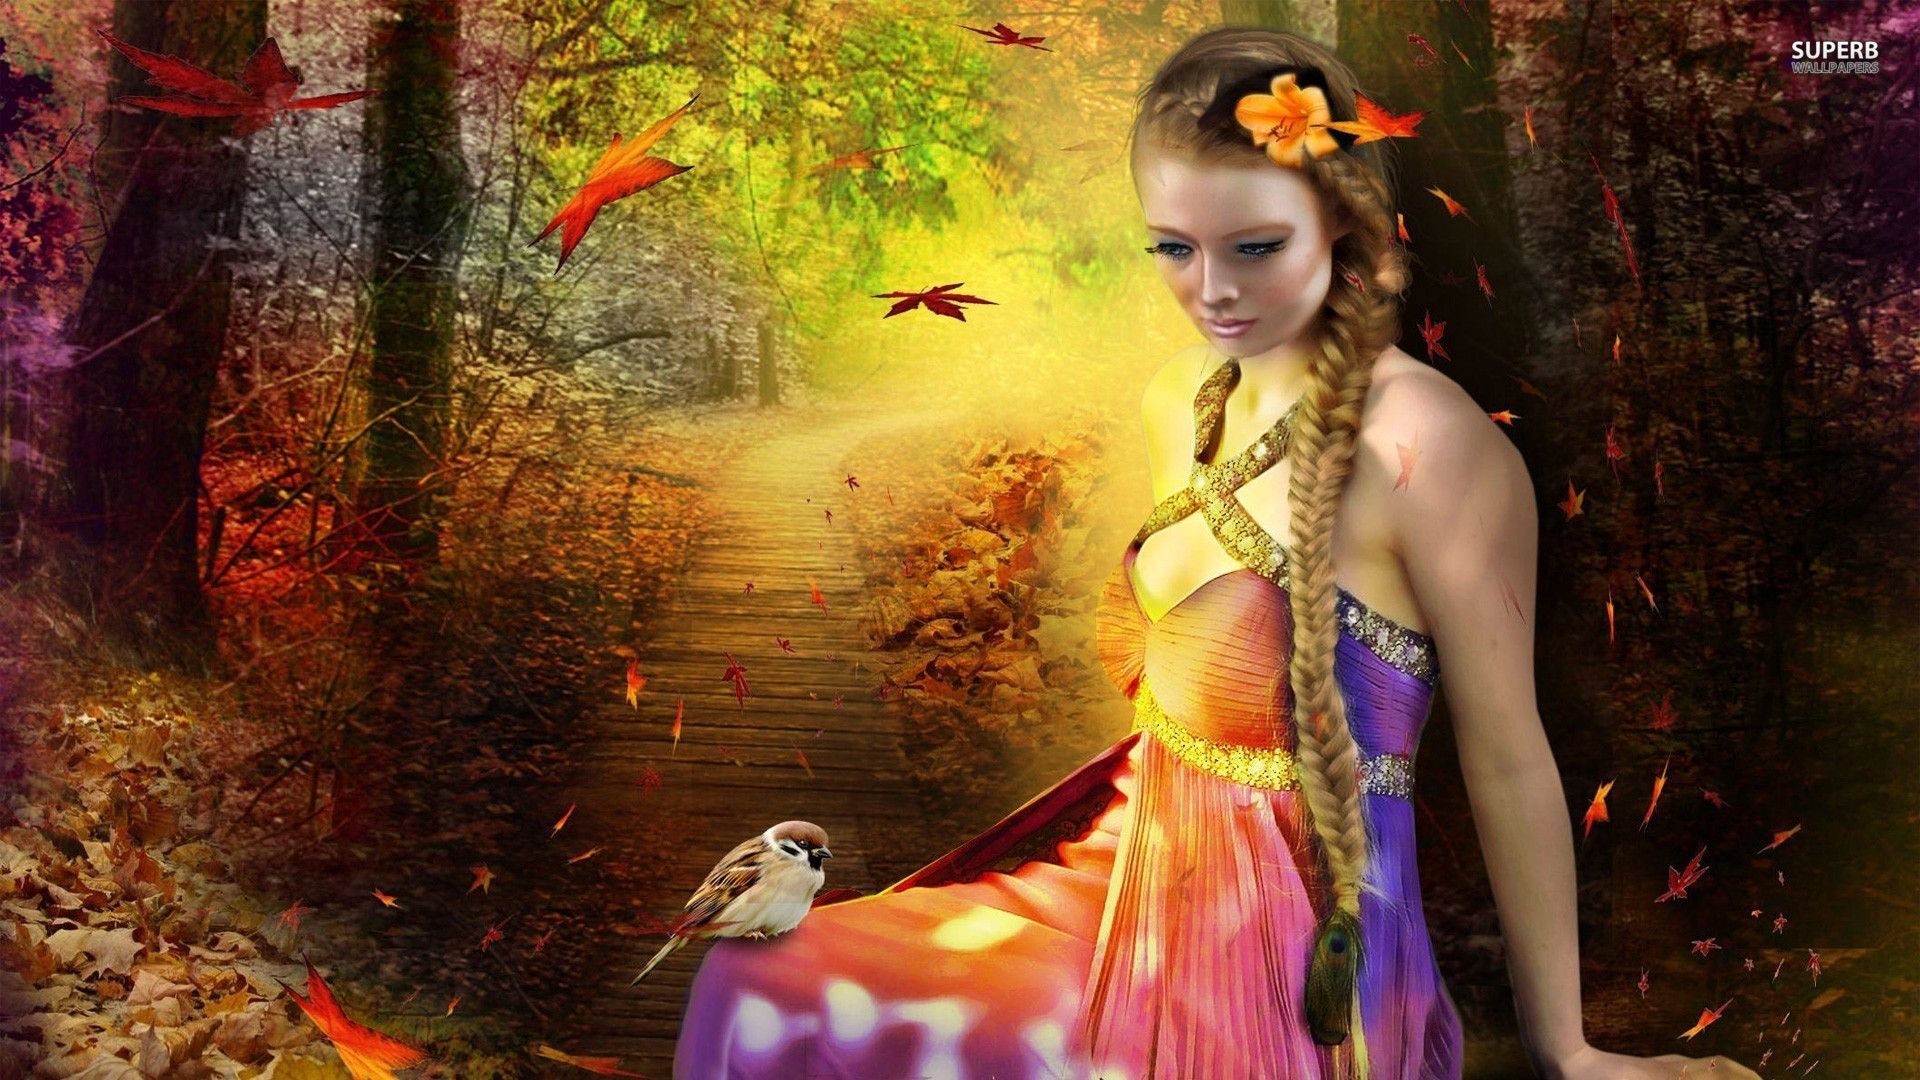 Forest fairy wallpaper - Fantasy wallpapers - #24921